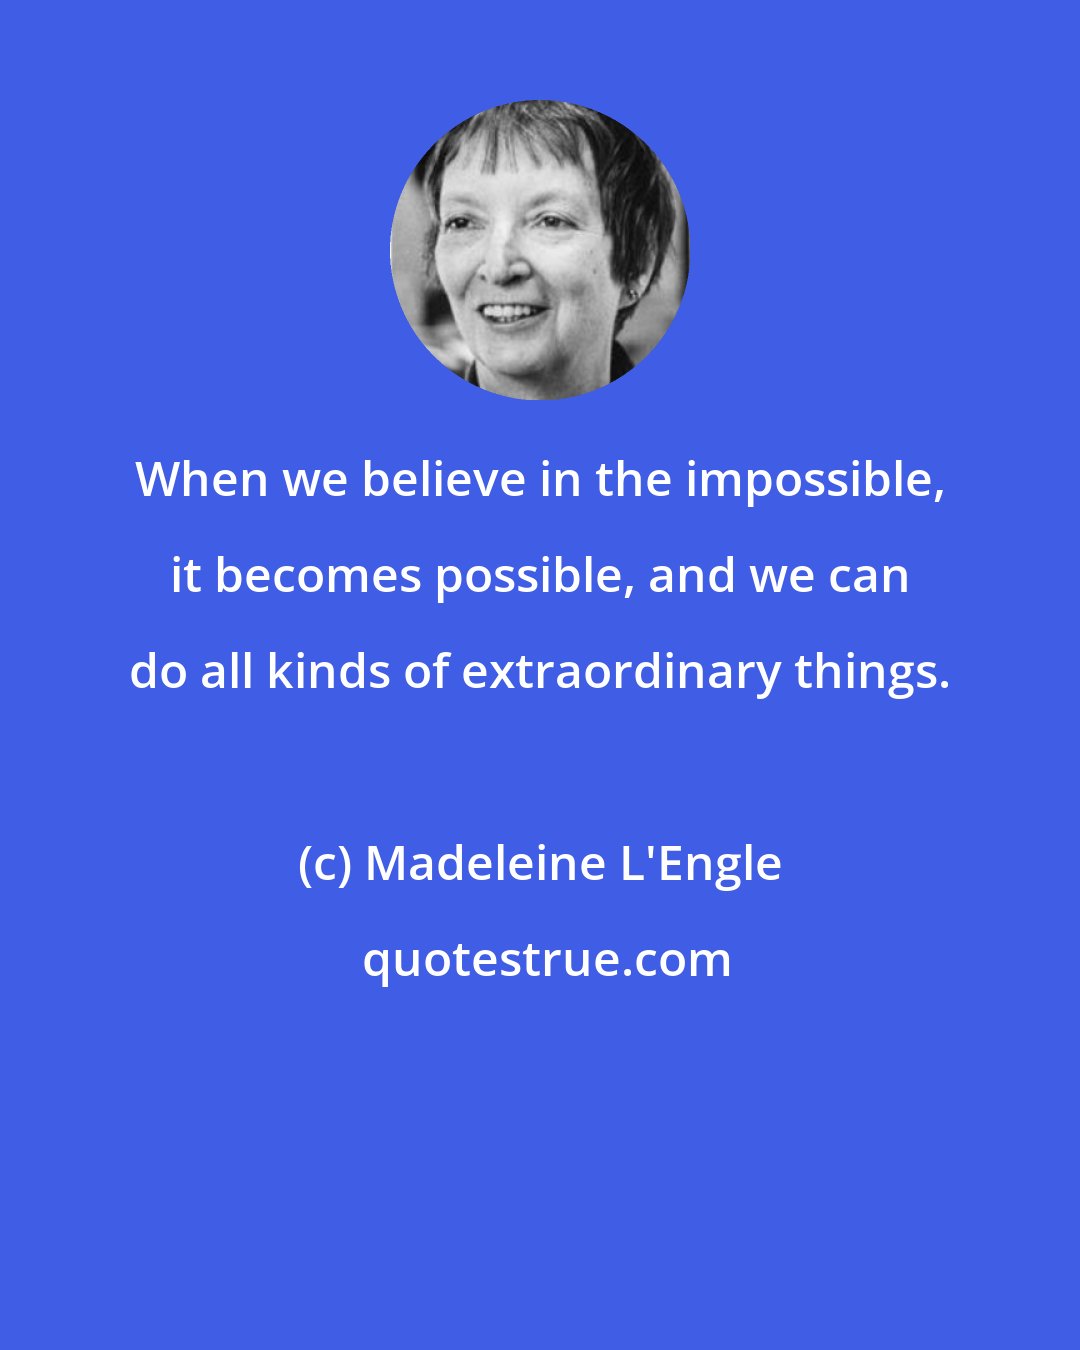 Madeleine L'Engle: When we believe in the impossible, it becomes possible, and we can do all kinds of extraordinary things.